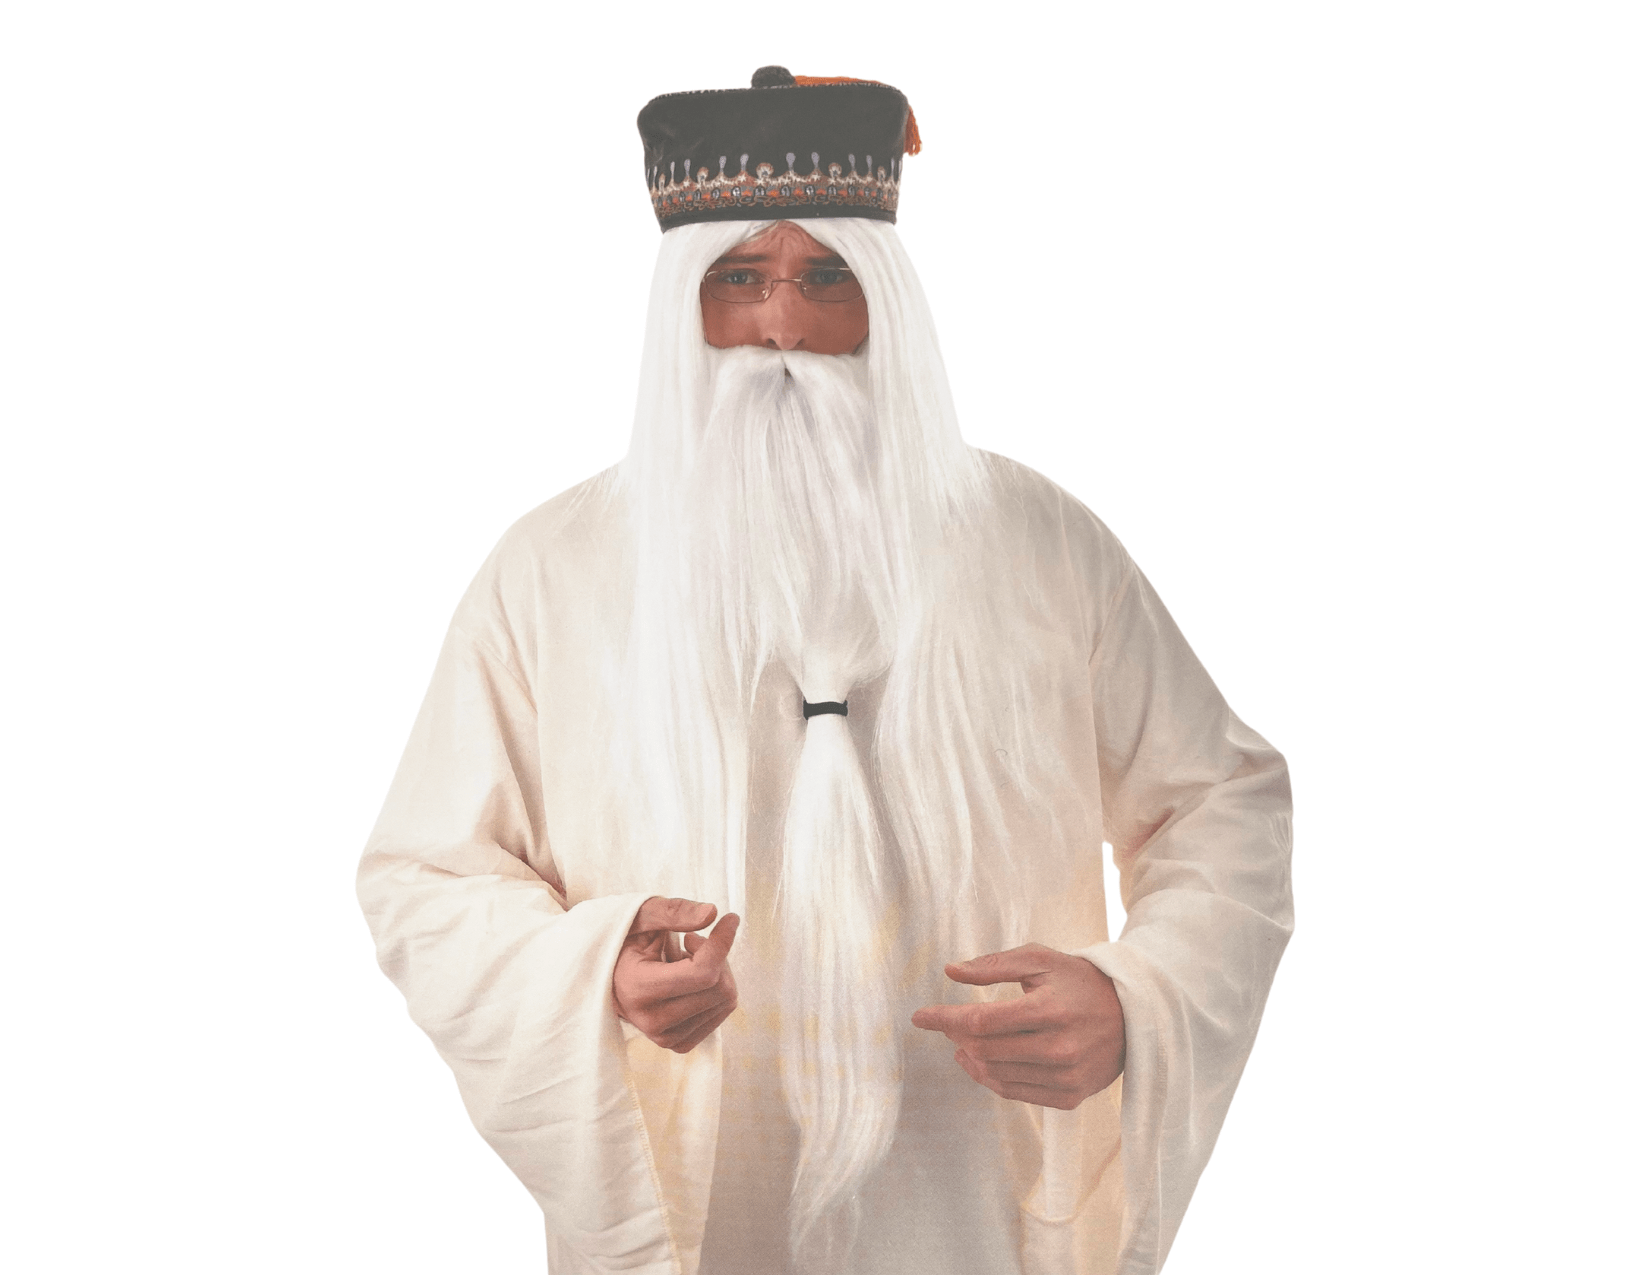 Featured image for “Wizard White Wig & Beard”